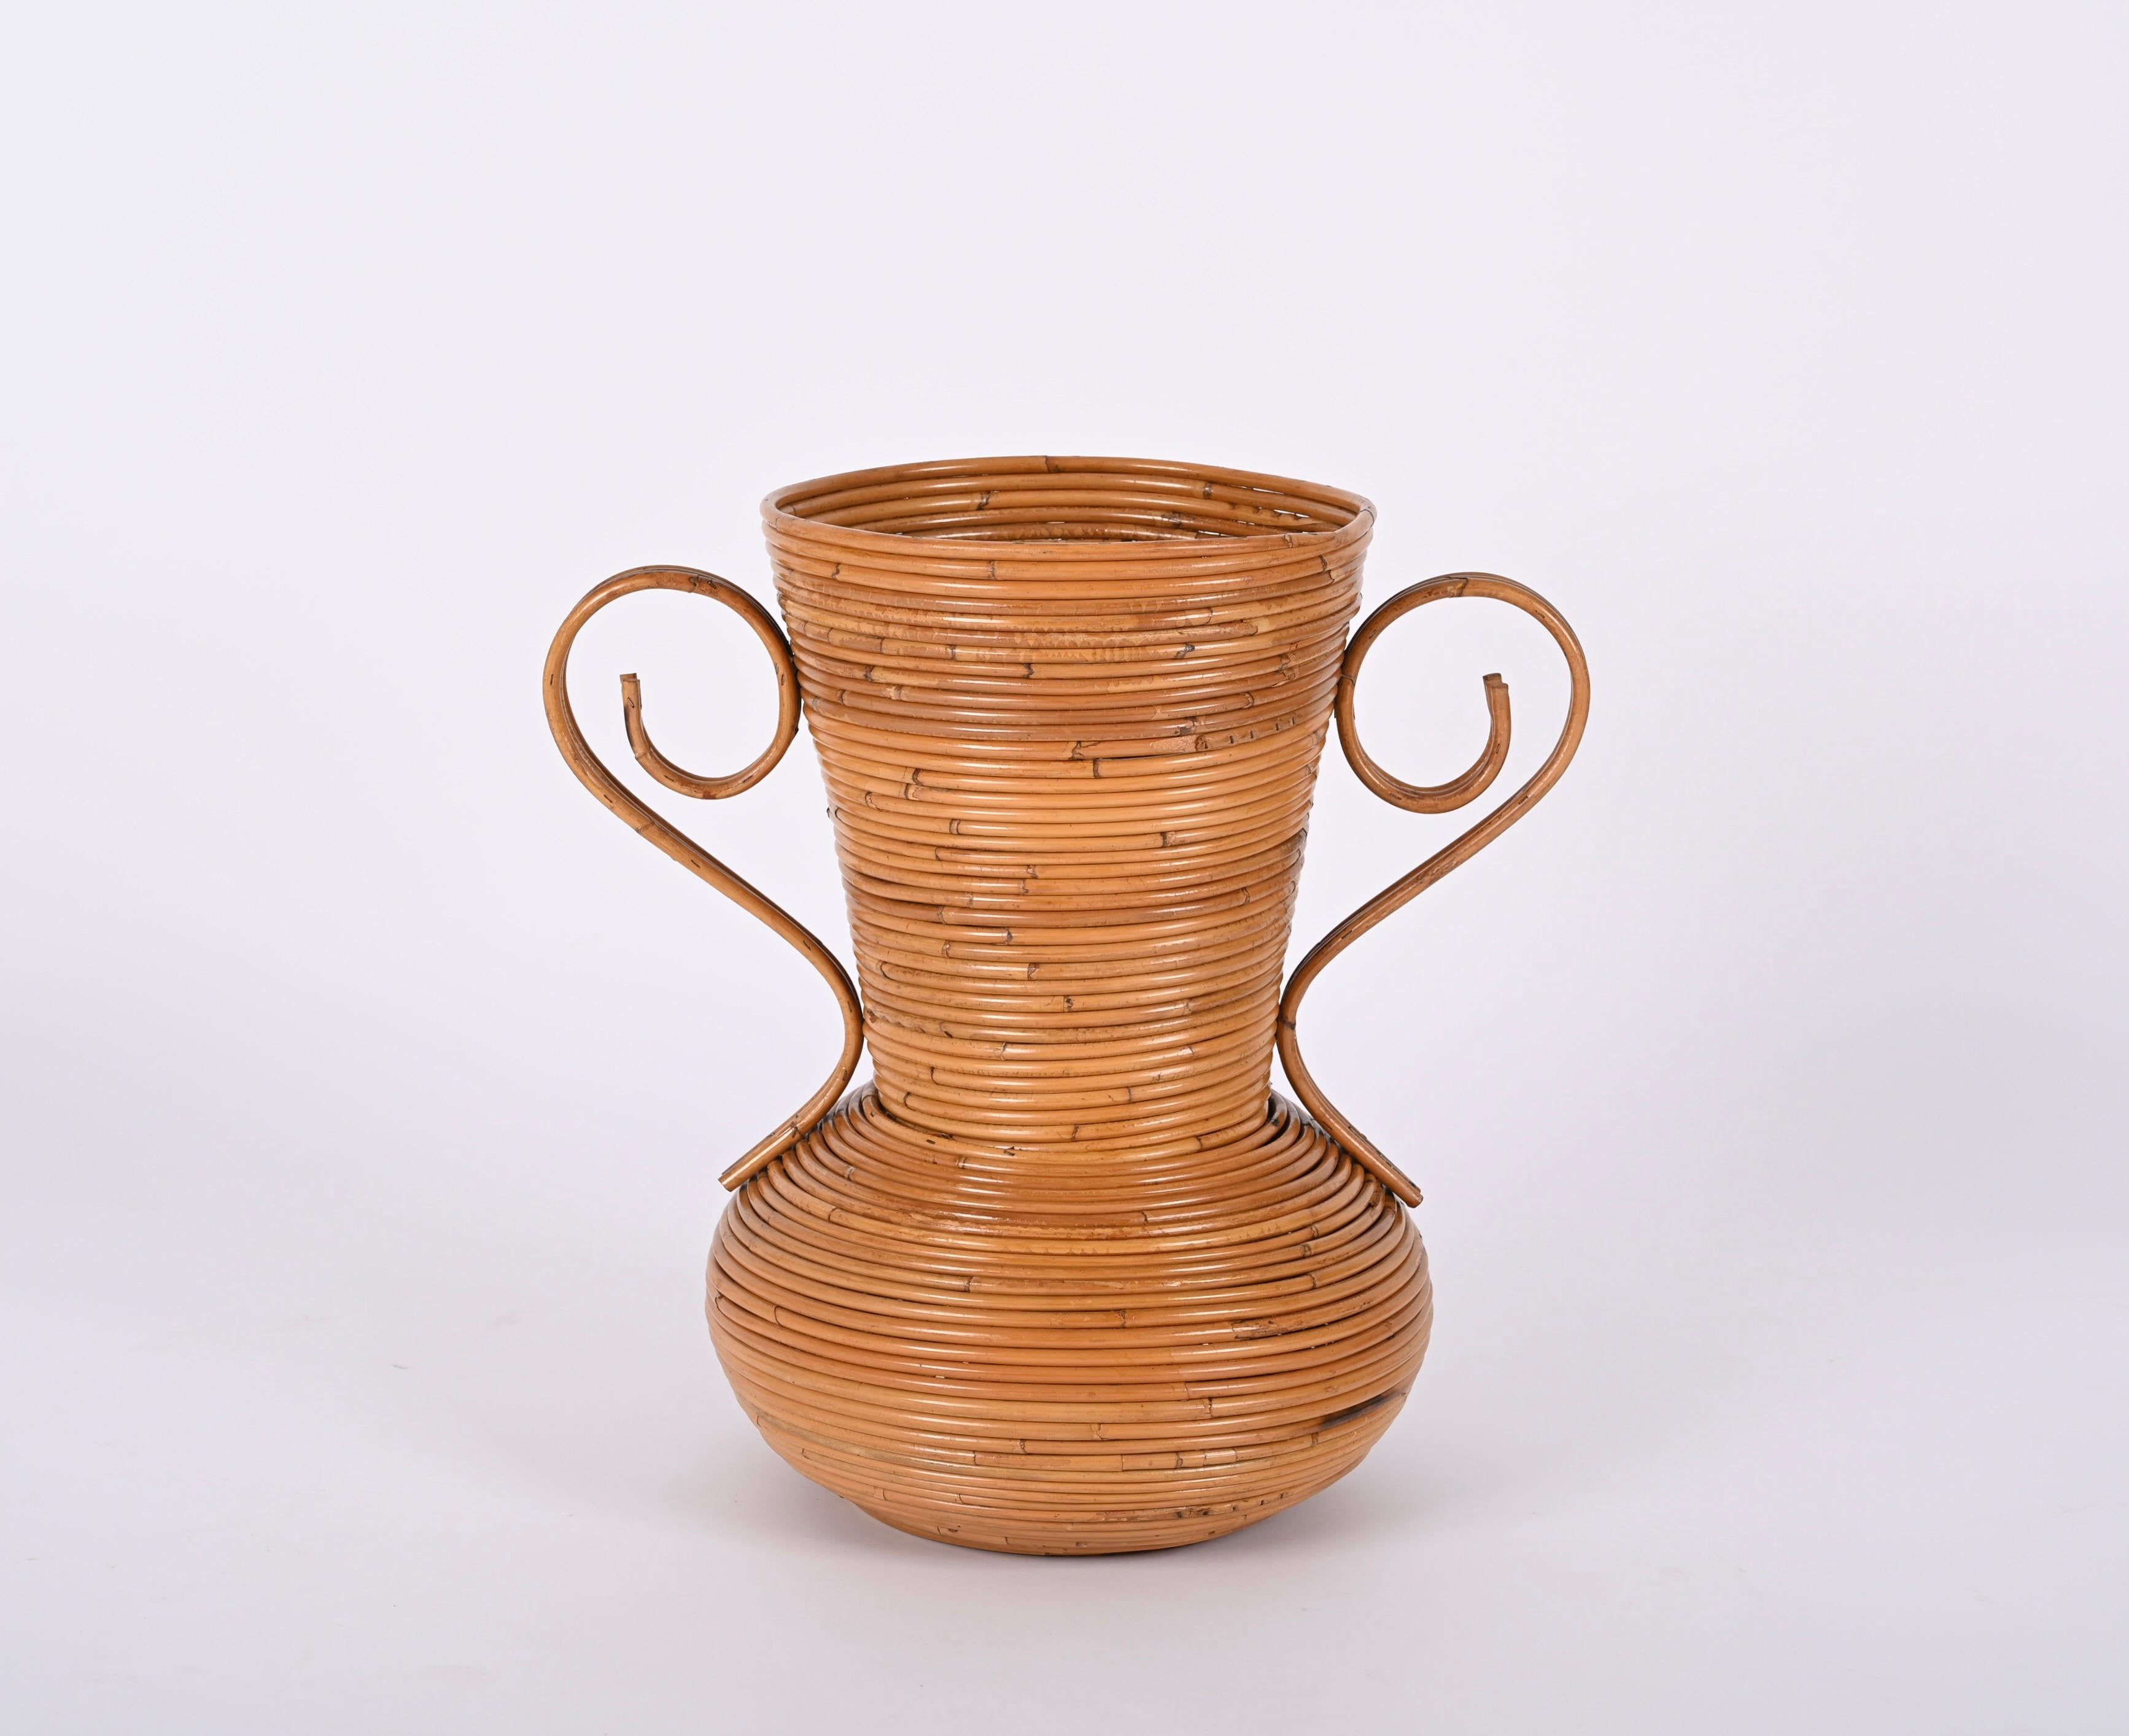 Italian Midcentury Bamboo and Rattan Decorative Vase, by Vivai del Sud, Italy, 1970s For Sale